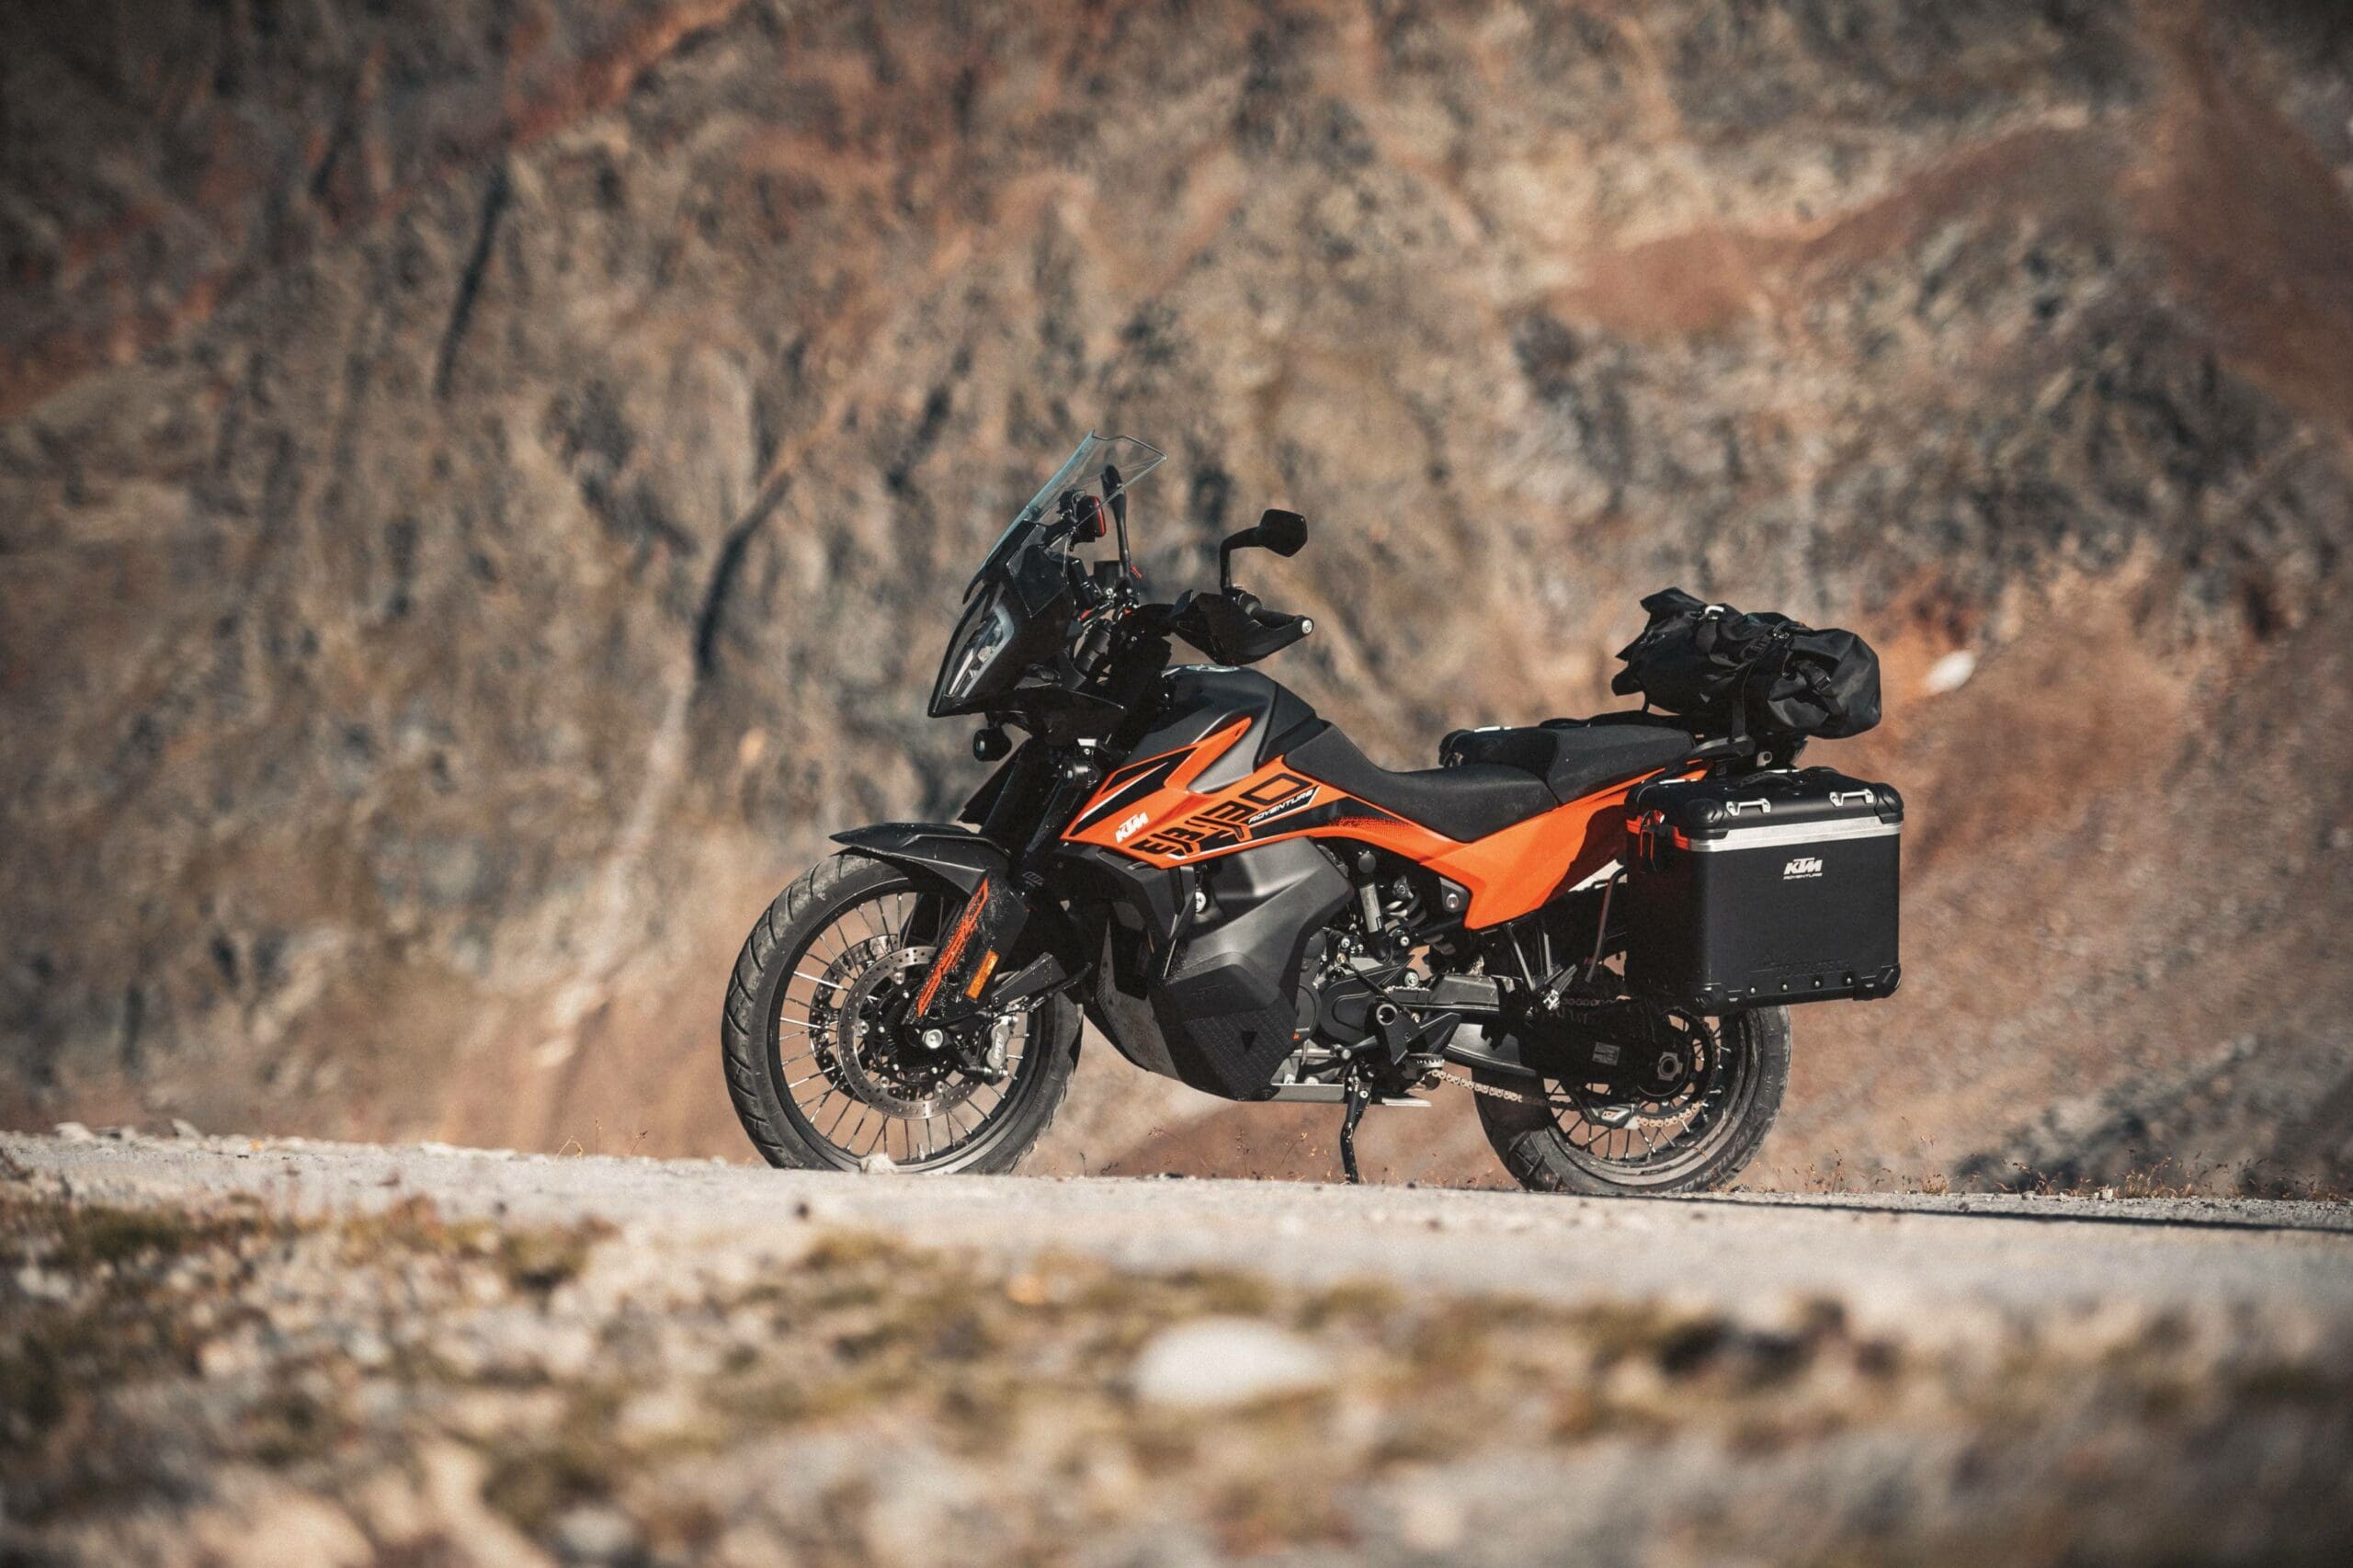 A KTM motorcycle with Conti TKC80 tires. Media sourced from Motorcycle.com